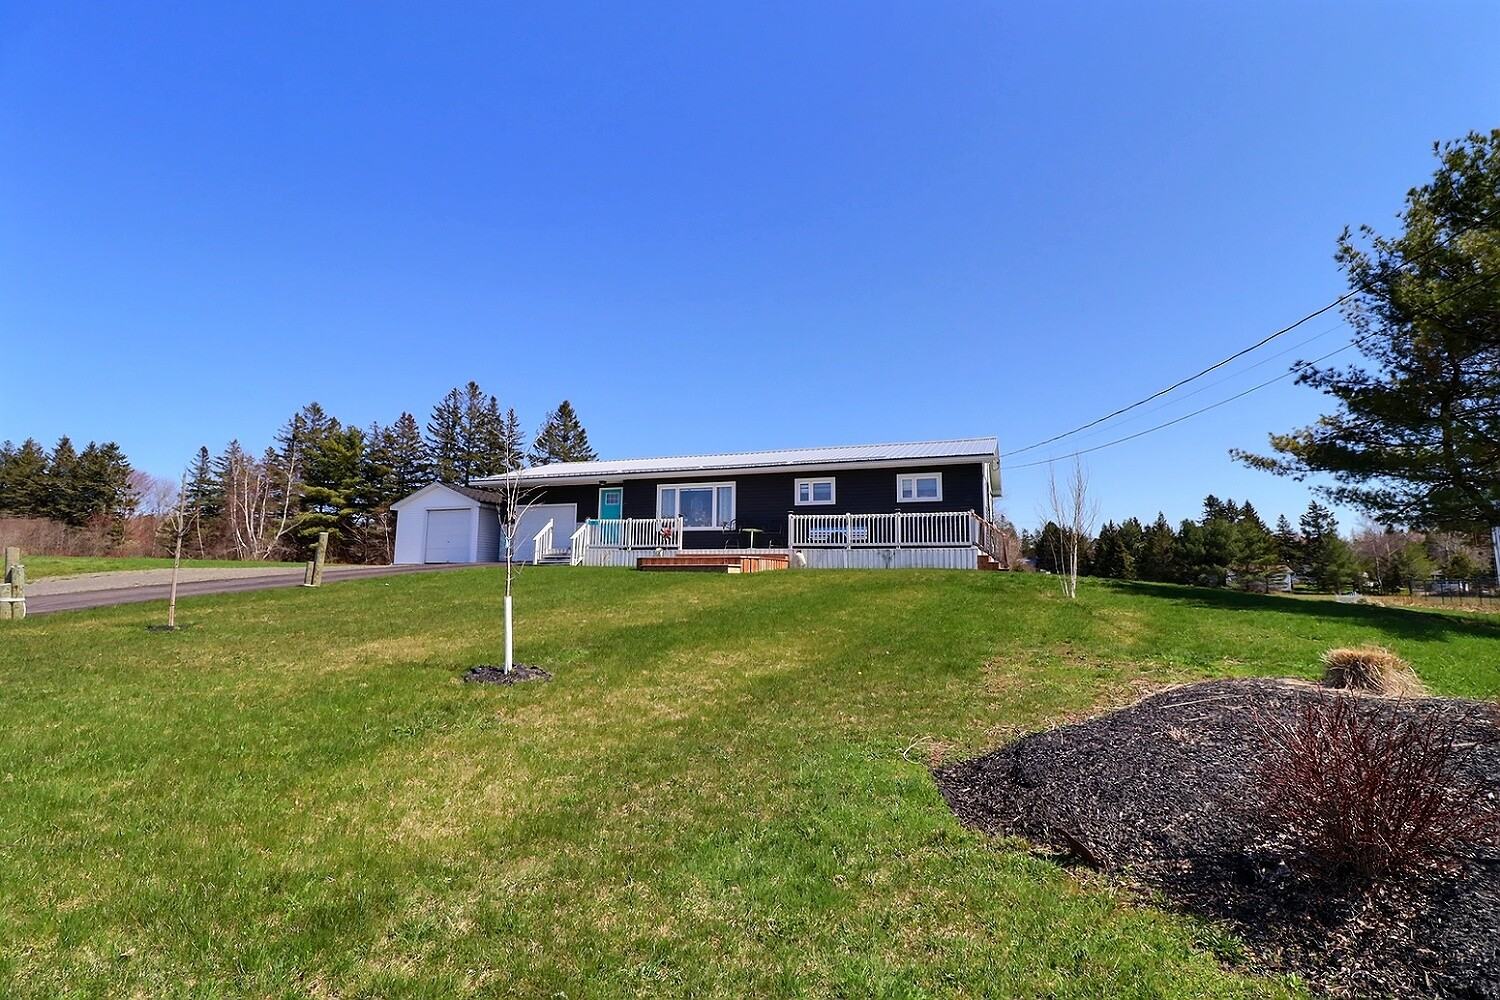 17 Millview Dr, Lakeville, NB E1H 1A4, Canada Photo 8